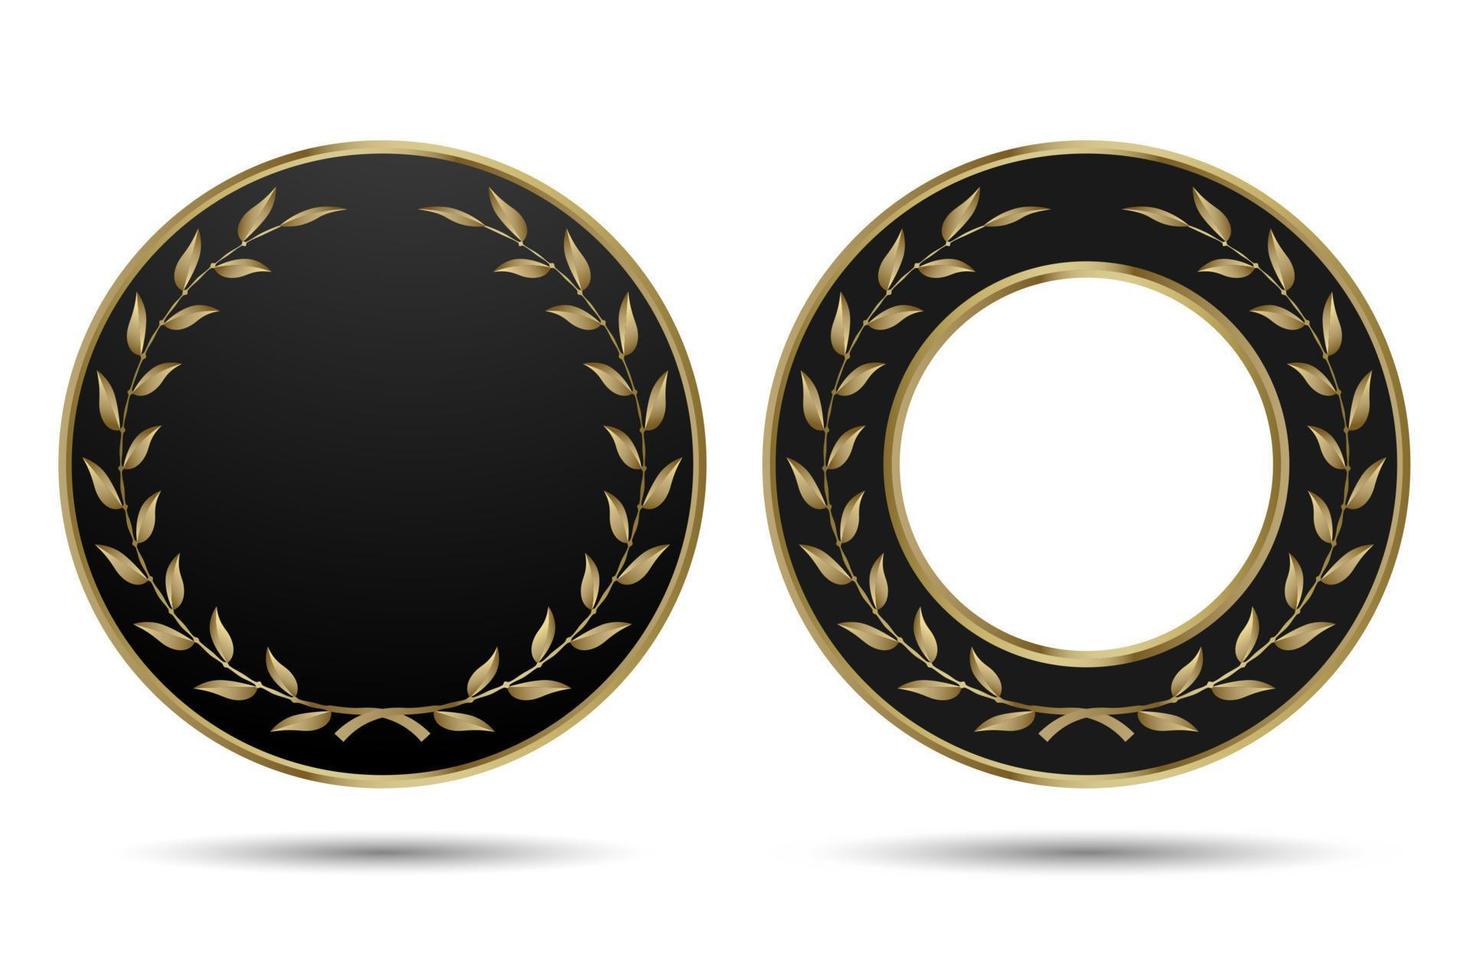 Gold laurel wreath badge isolated background. vector